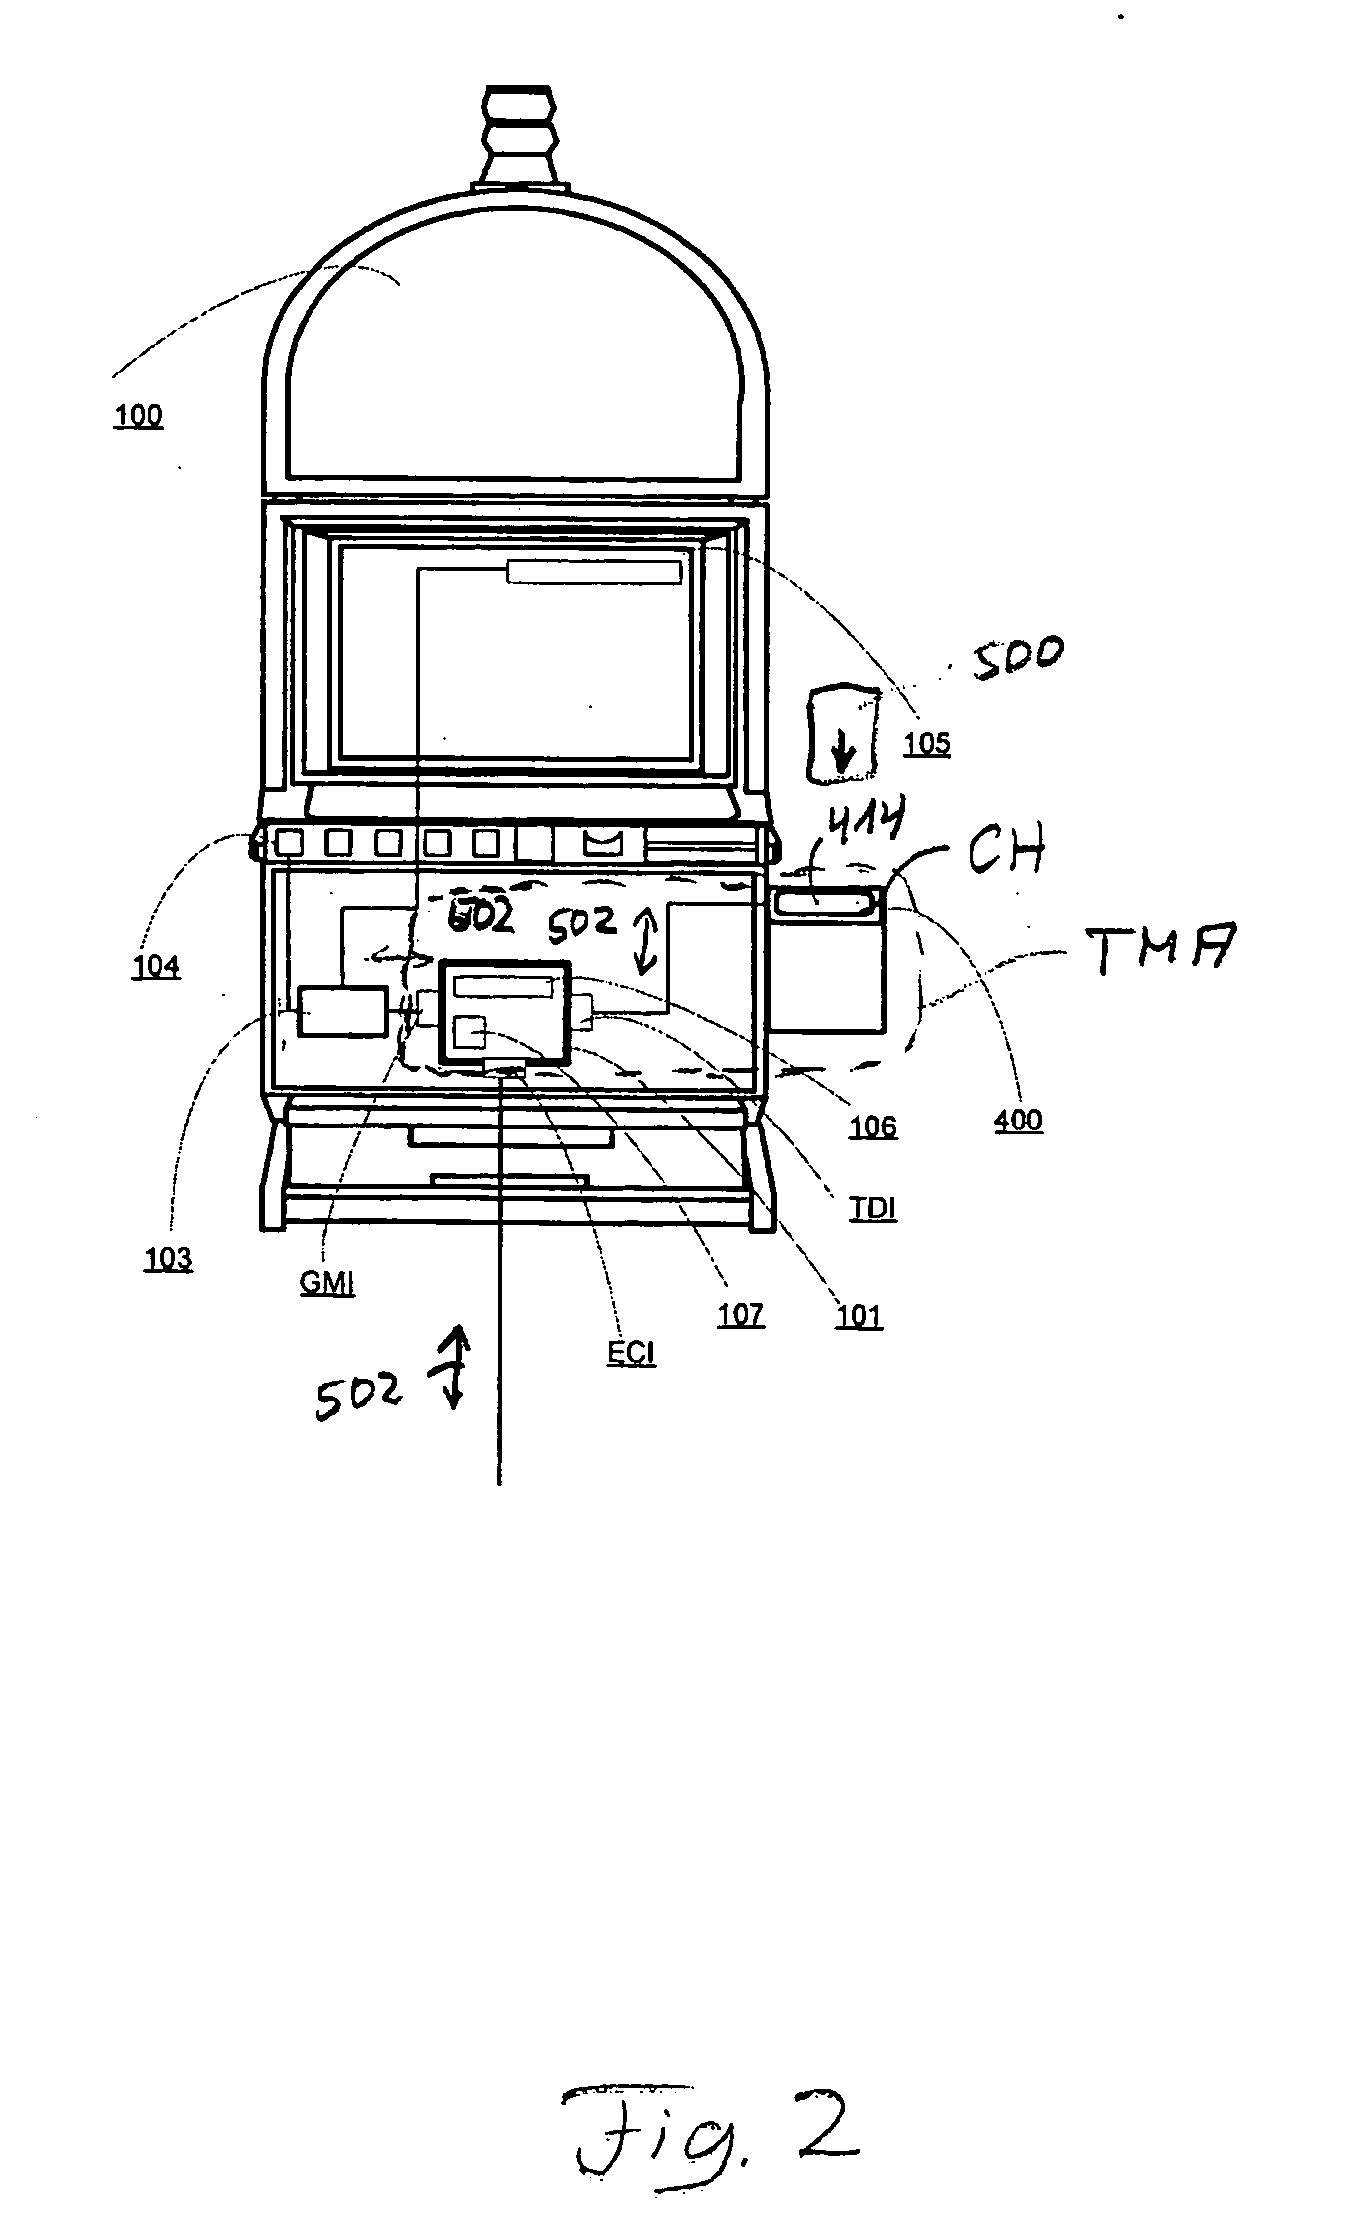 Ticket management apparatus, a ticketing device and a data management system for cashless operation